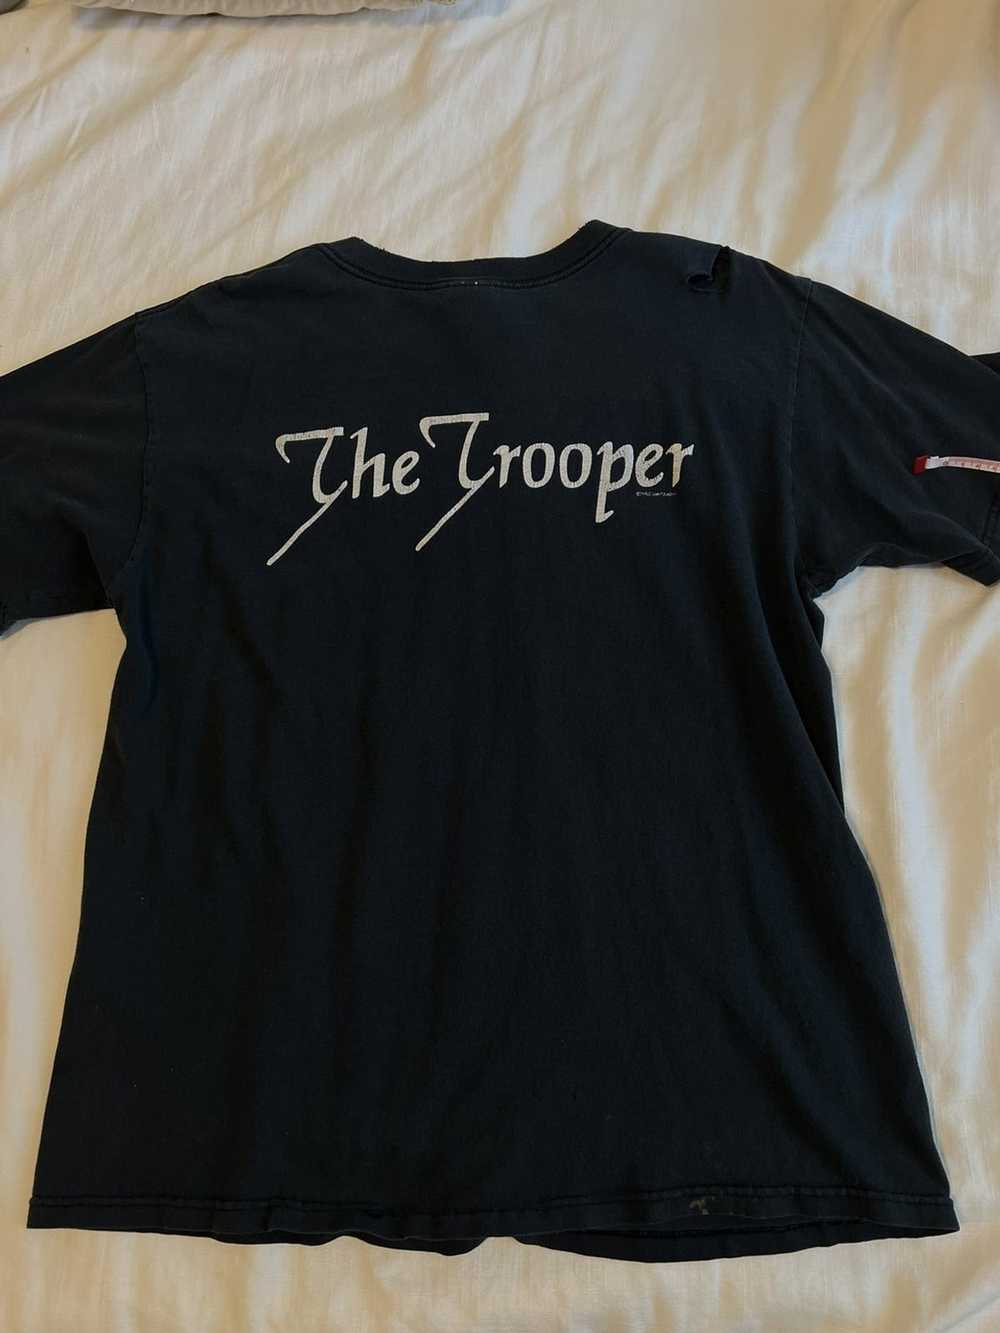 Band Tees × Vintage Iron Maiden The Trooper VTG T… - image 3